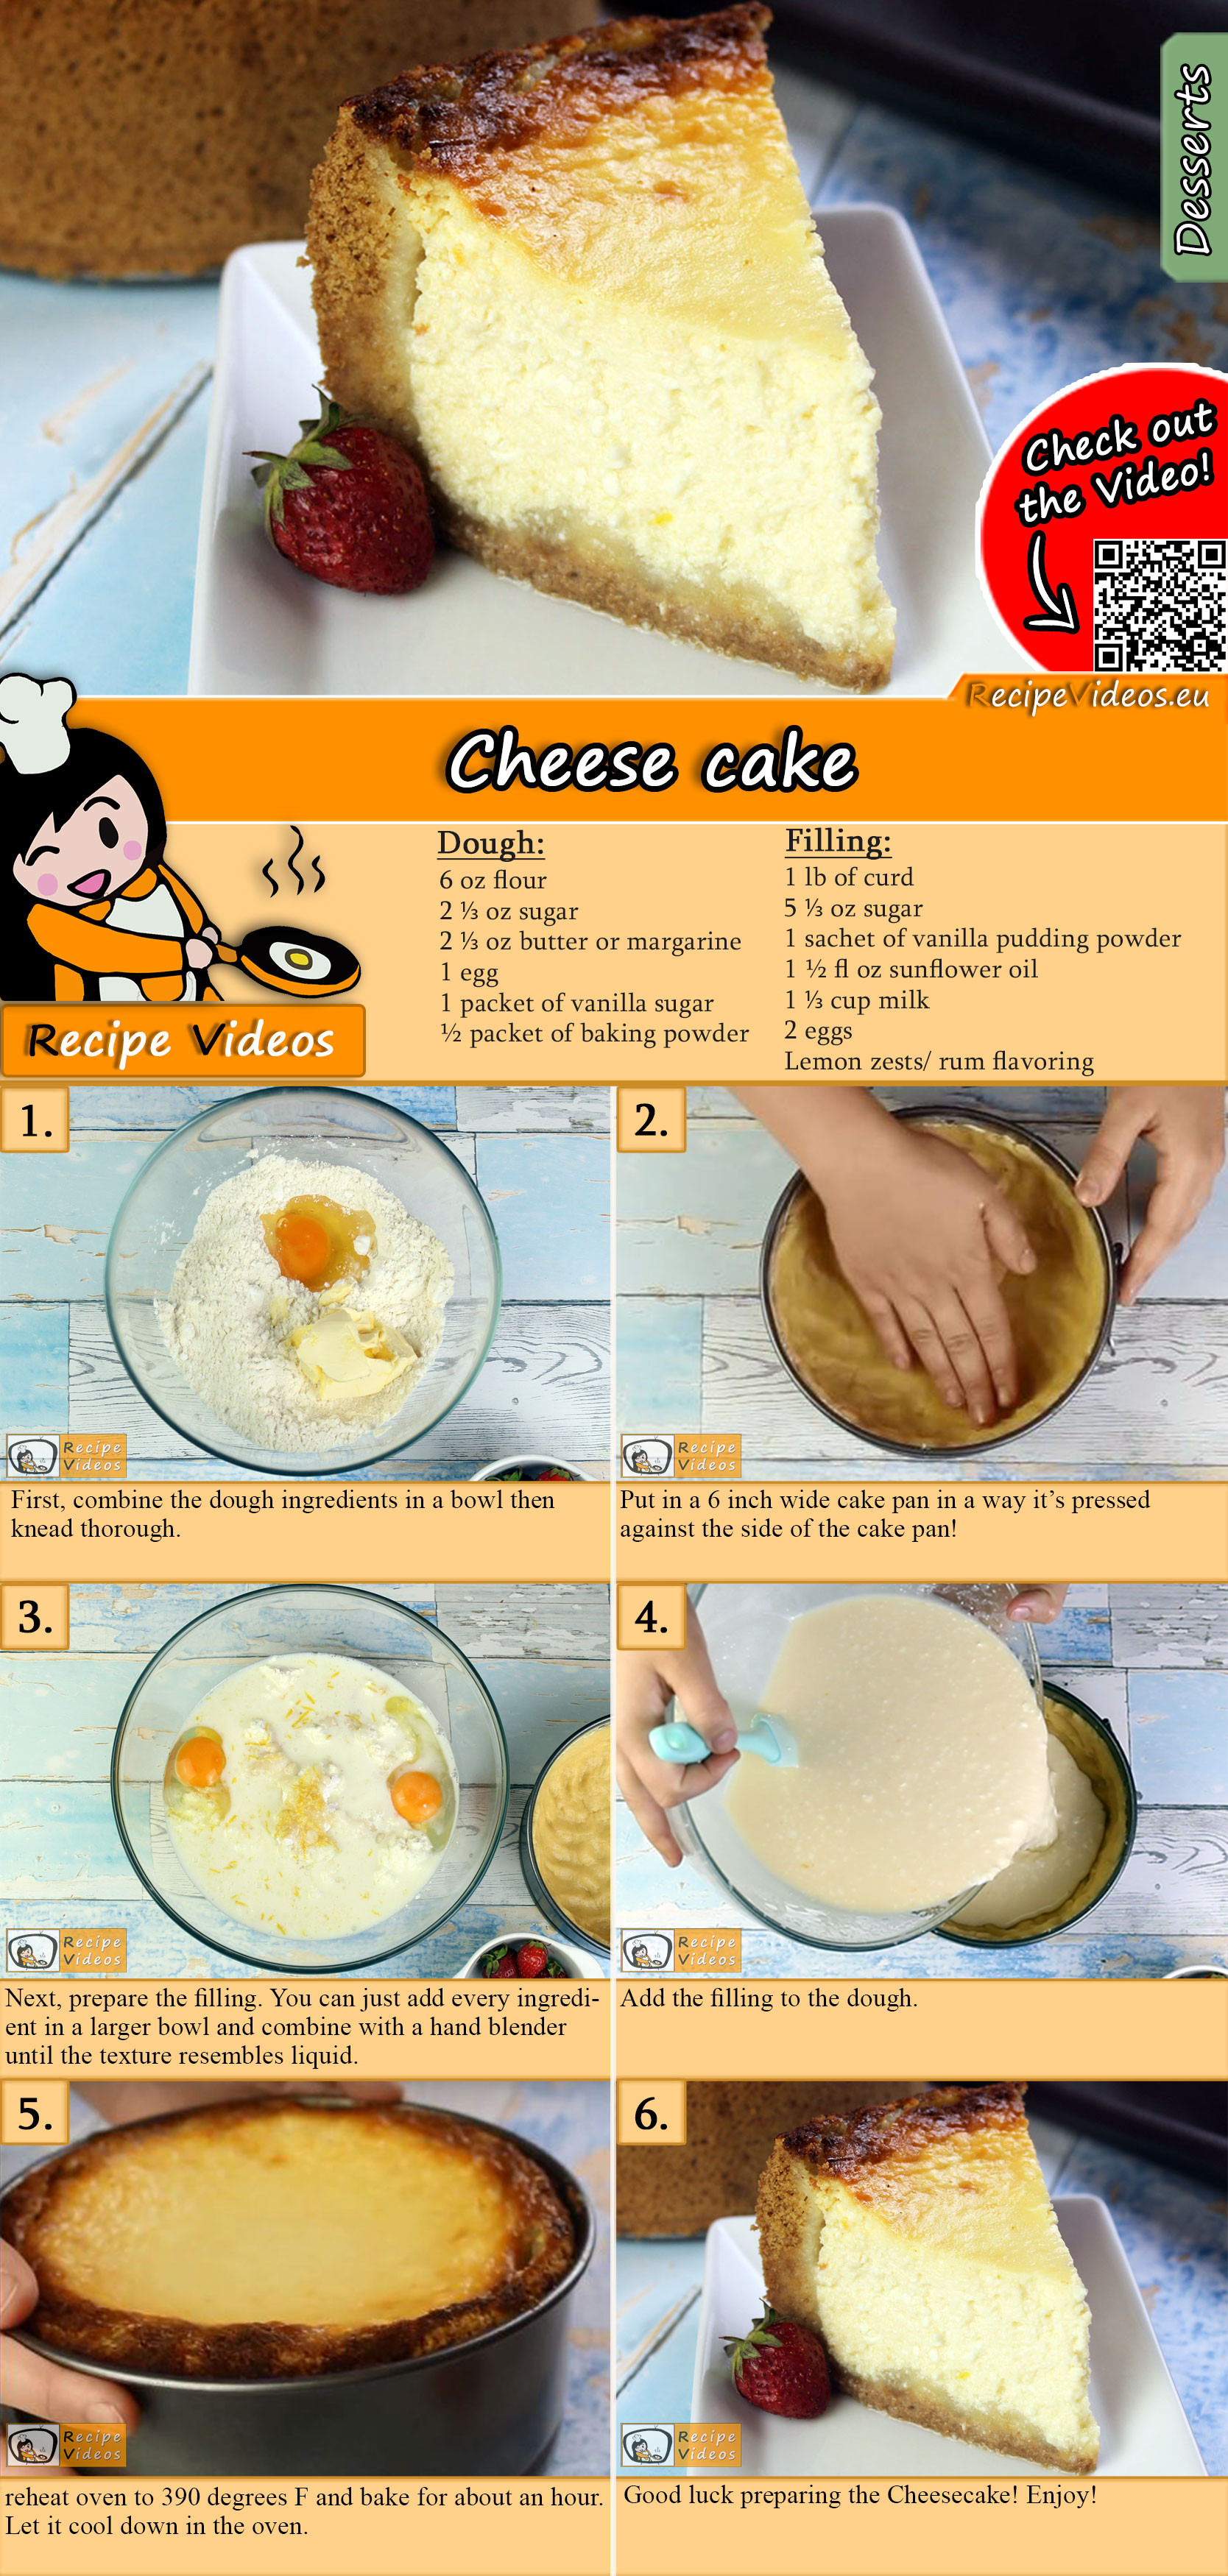 Cheese cake recipe with video